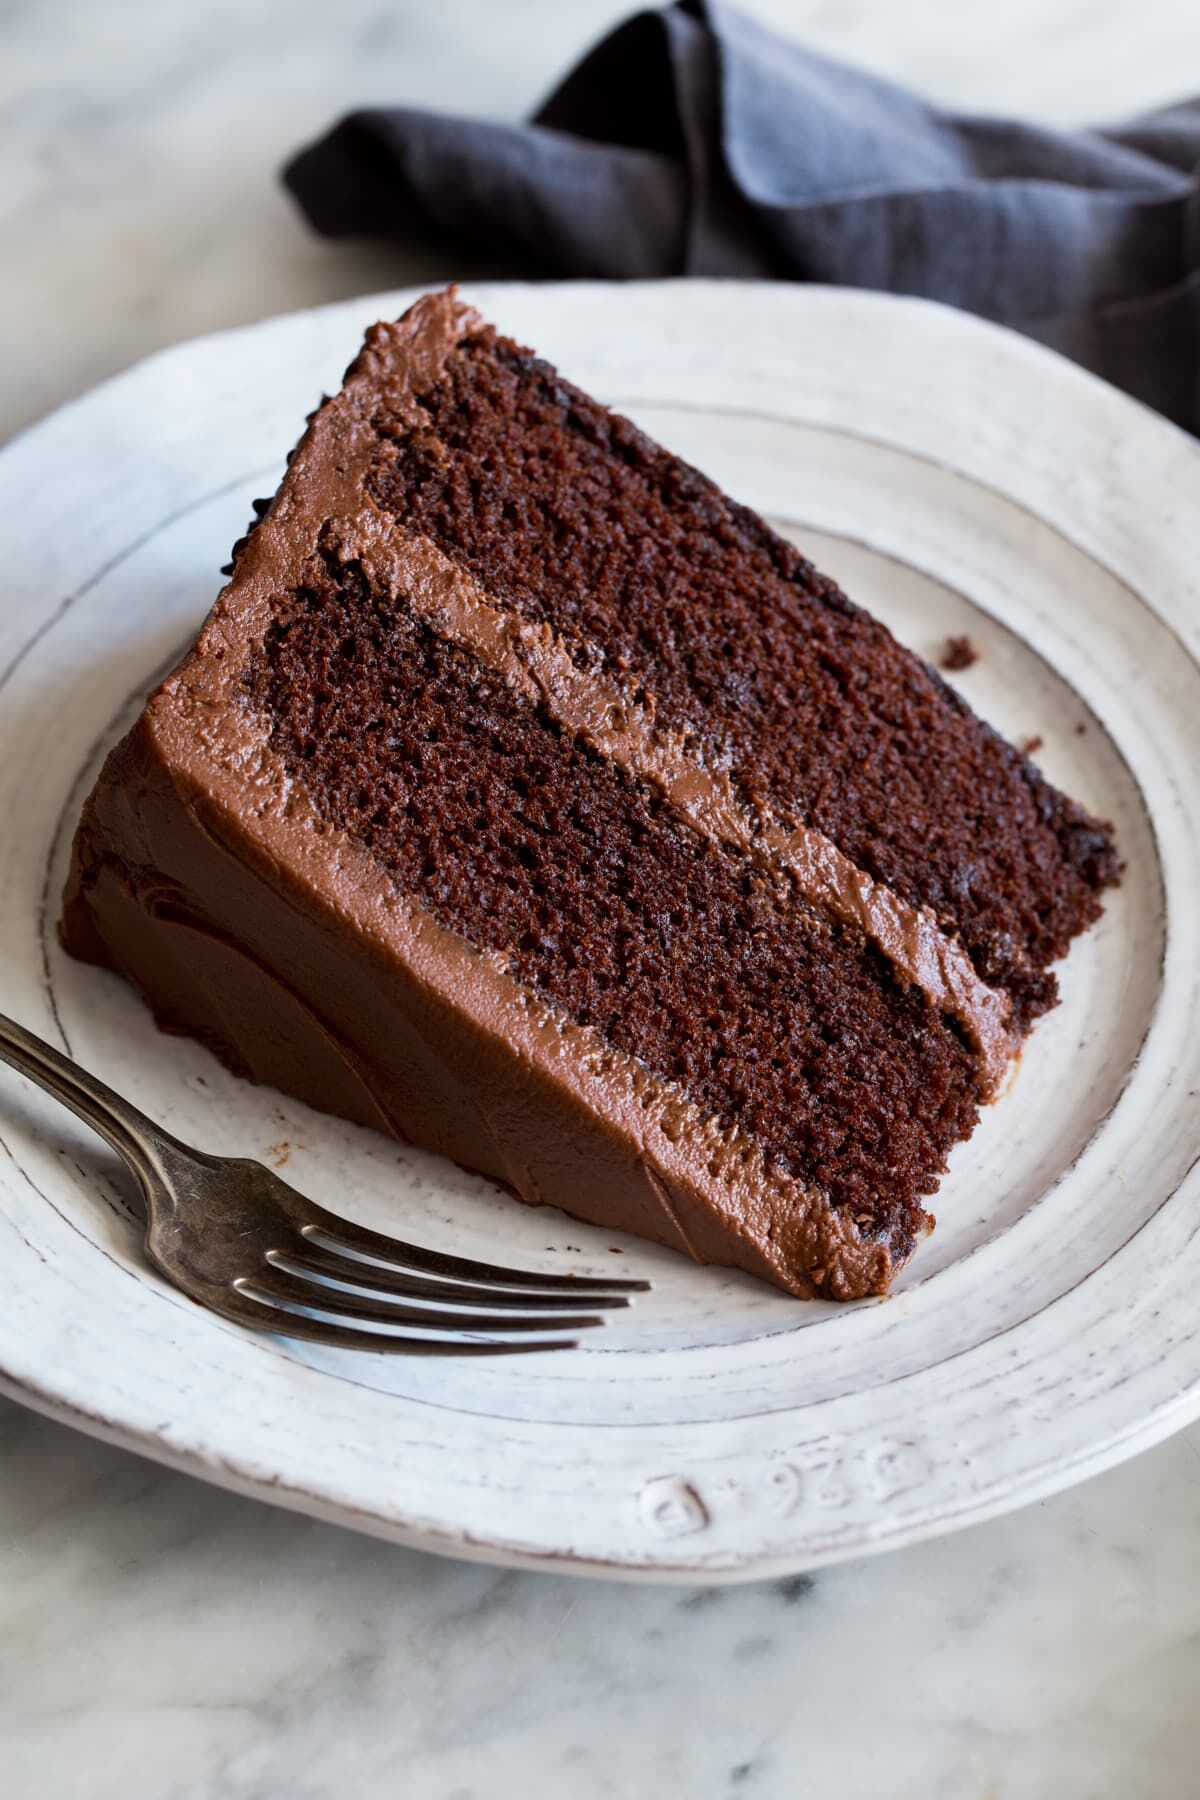 Who Decided to Put Sauerkraut in Chocolate Cake? - Gastro Obscura